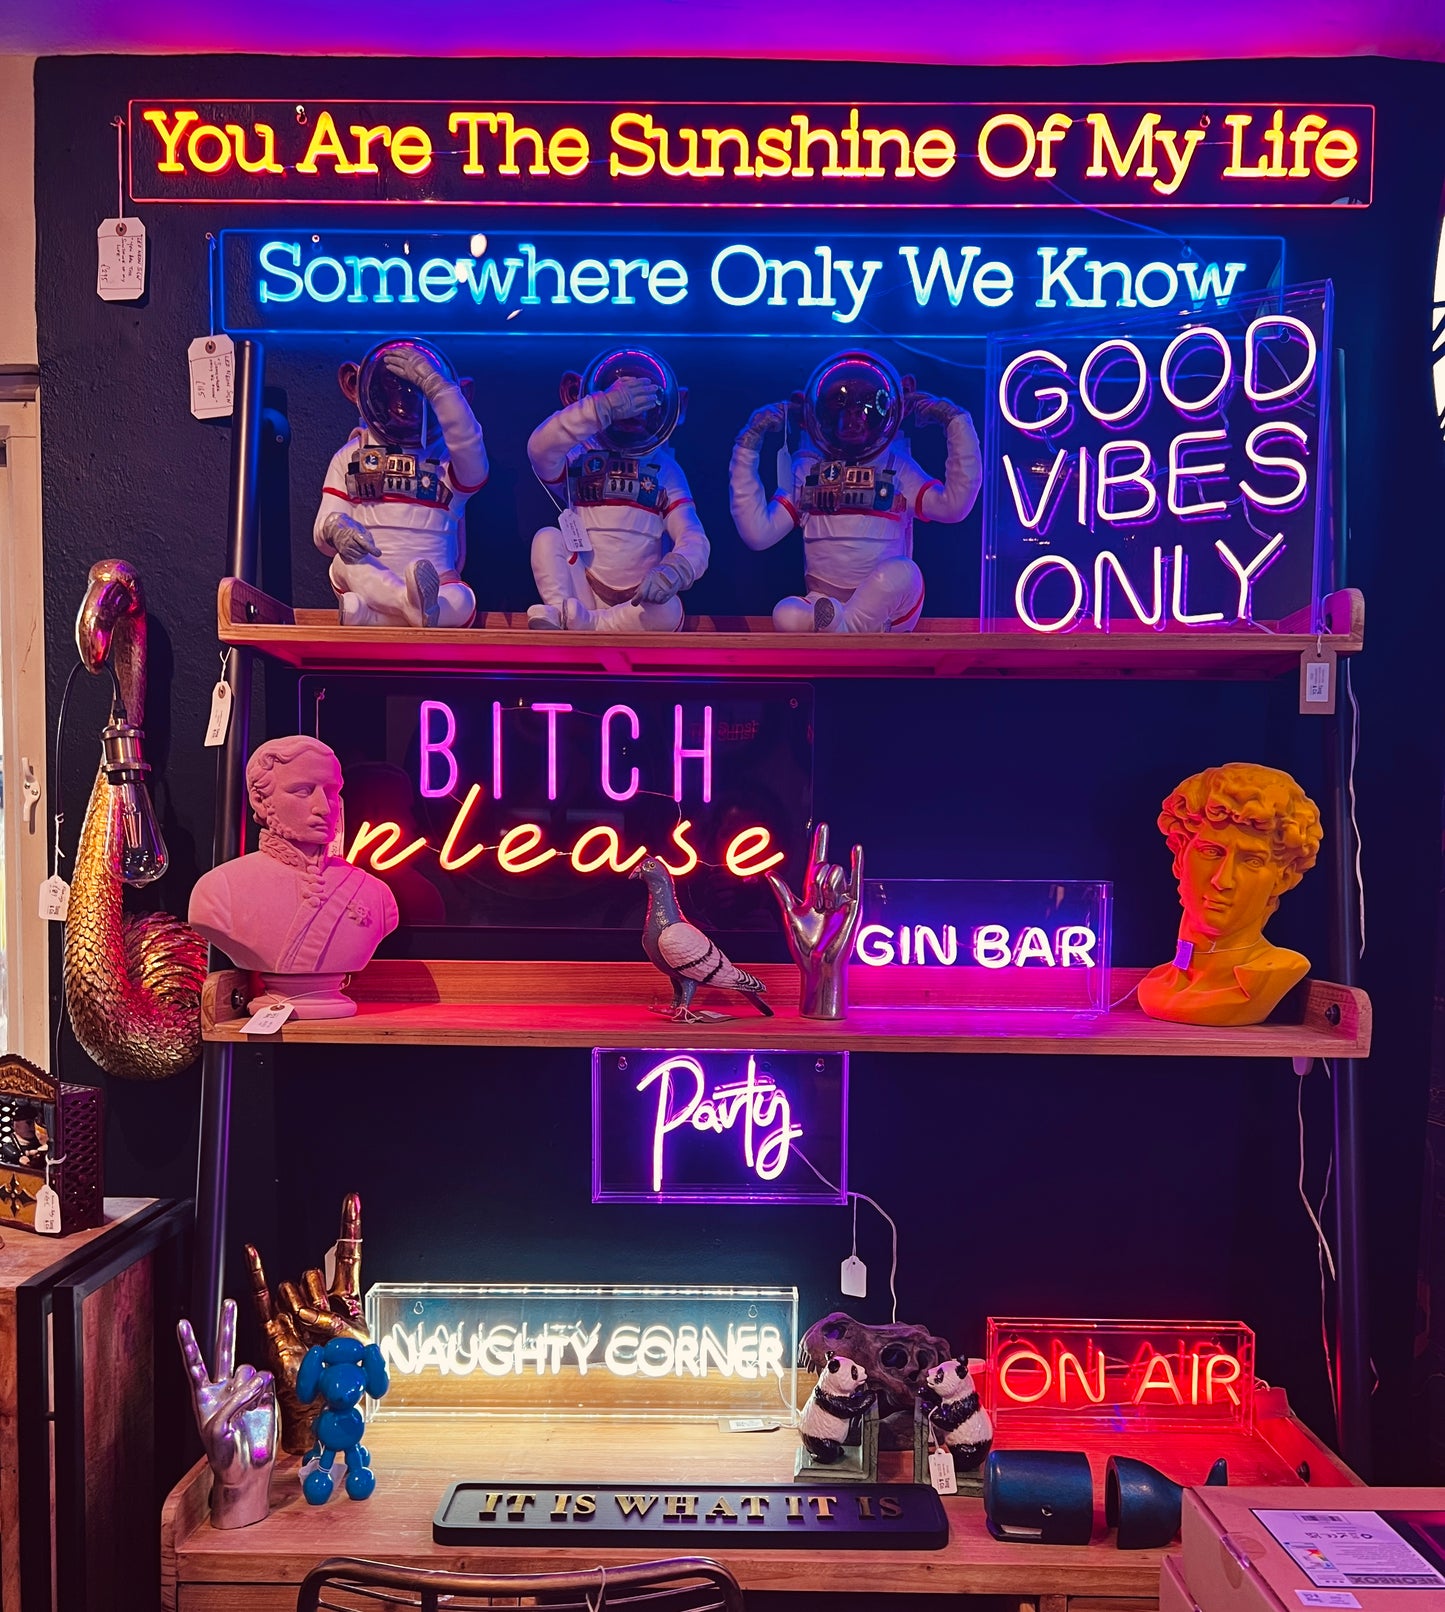 LED Neon - Your Are The Sunshine Of My Life